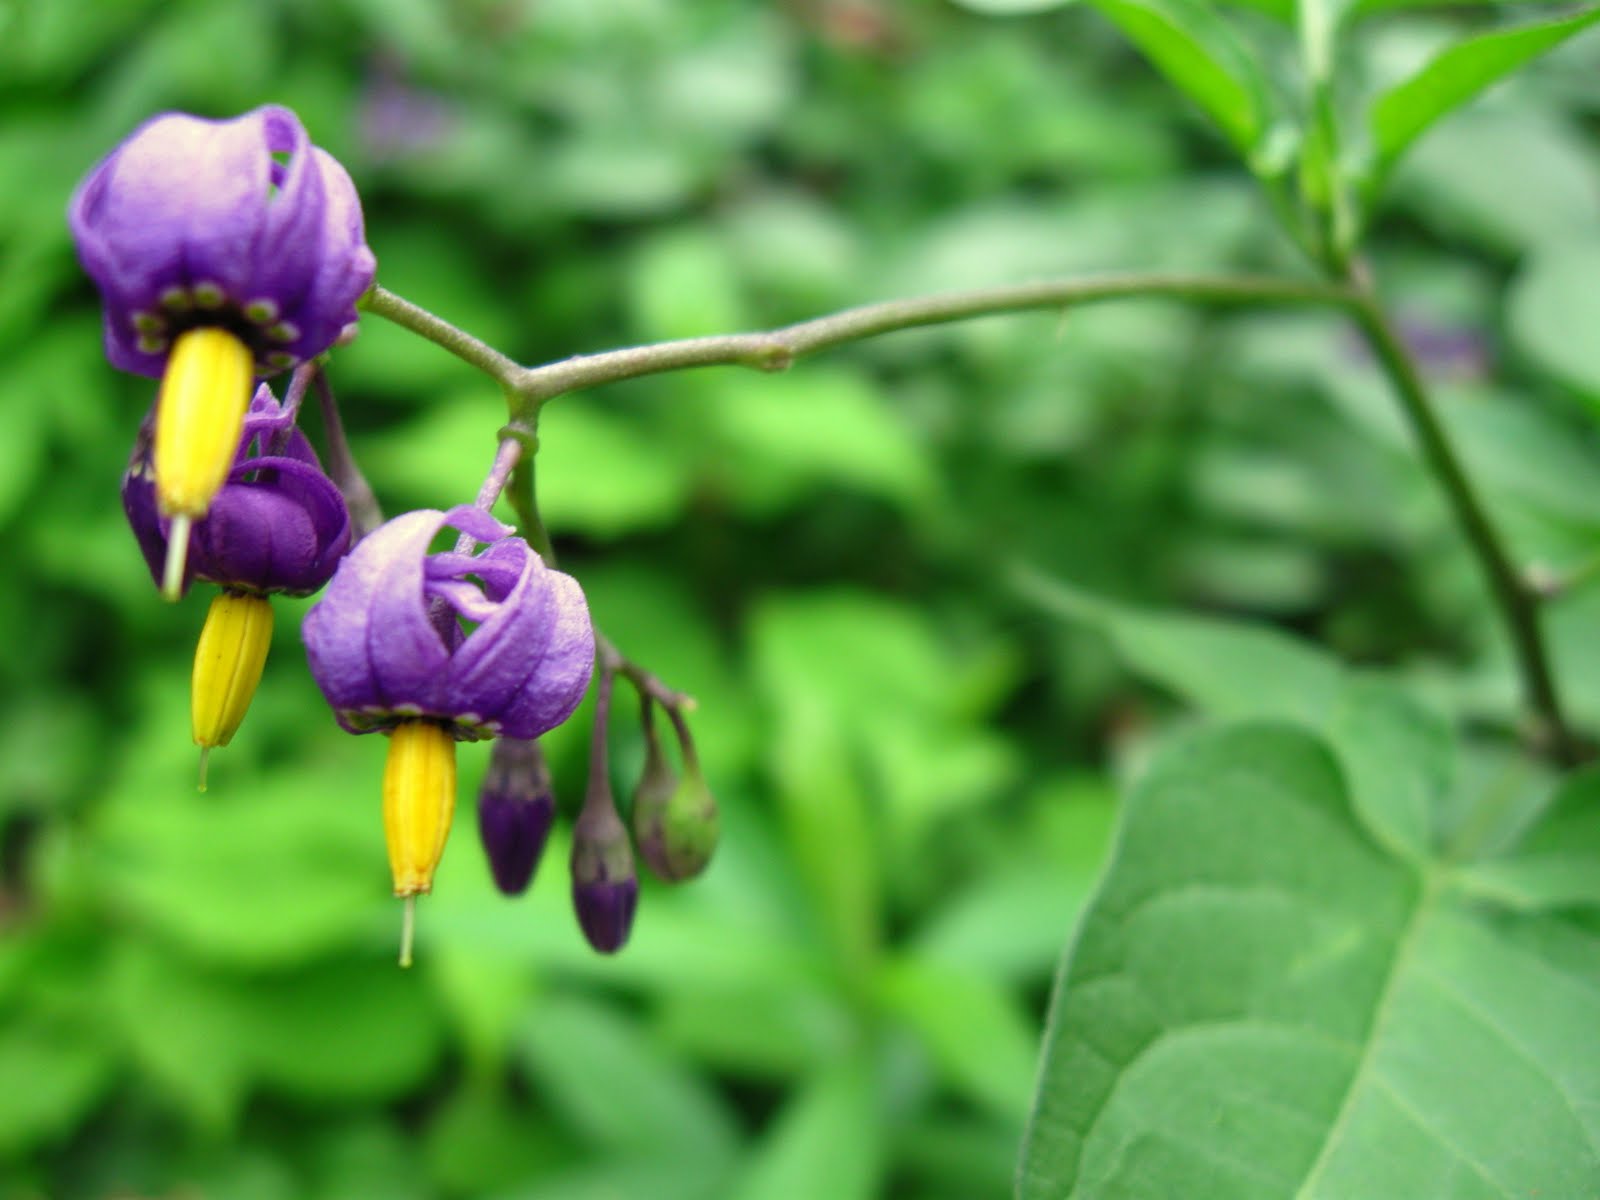 Deadly Nightshade: Poisonous Plant Of The Month 